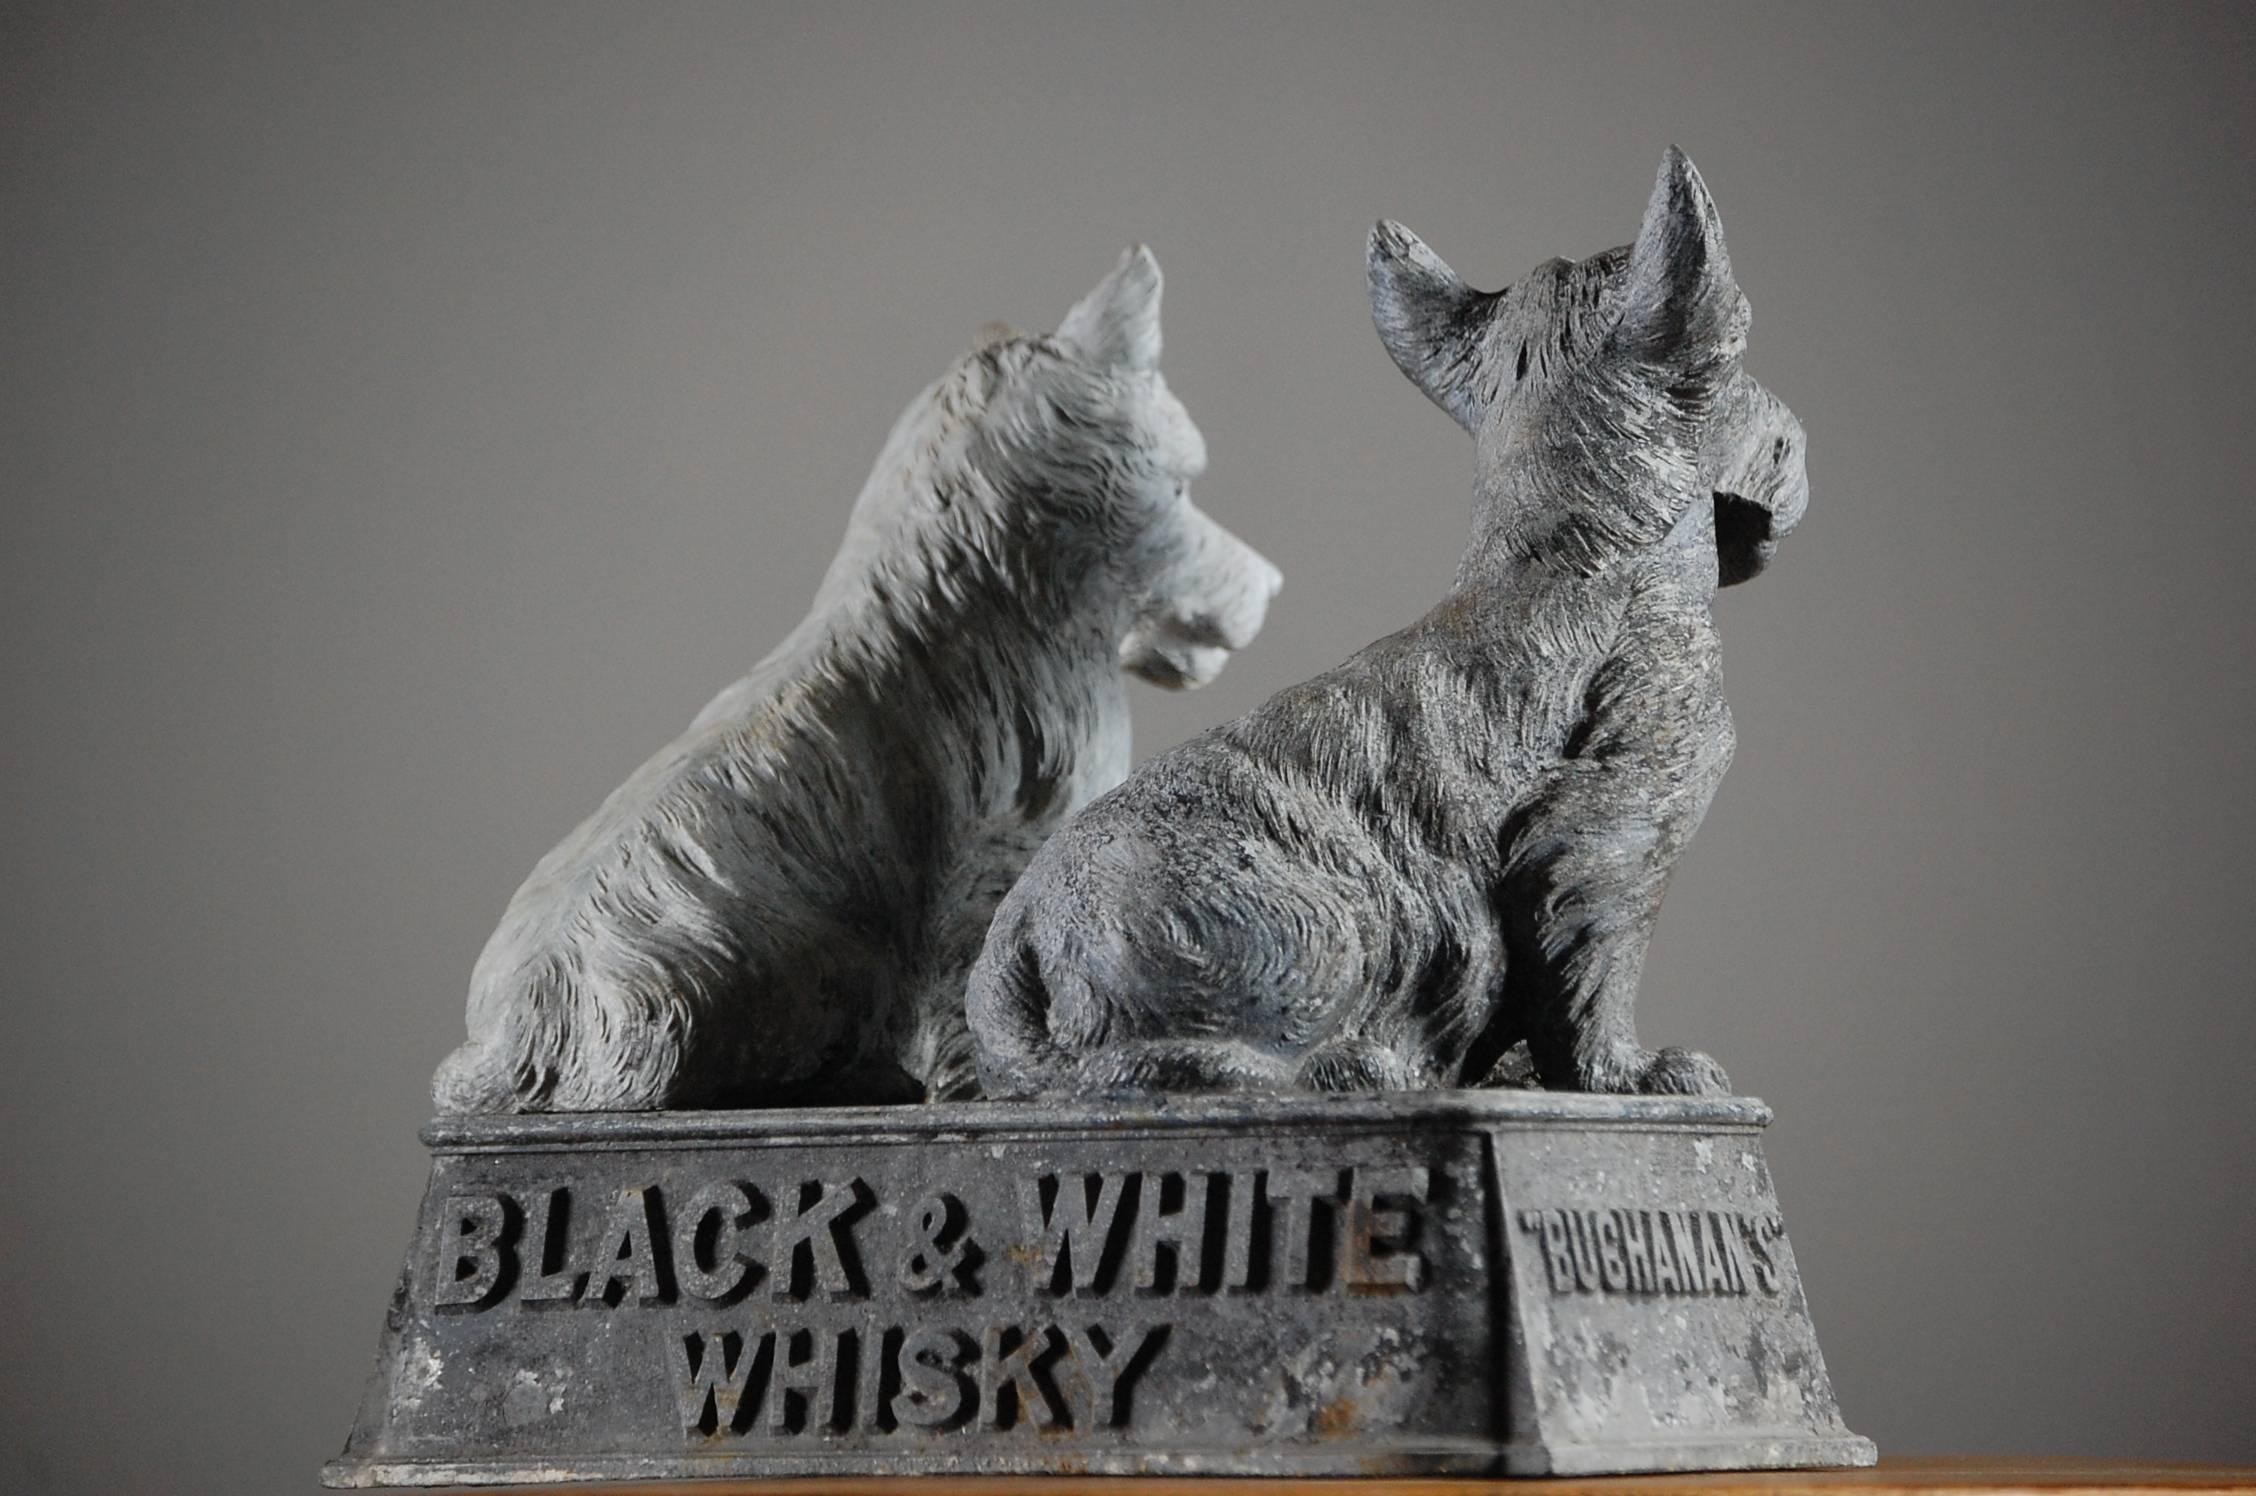 Painted Buchanans Whiskey Advertisng Black and White Scotty Dogs 